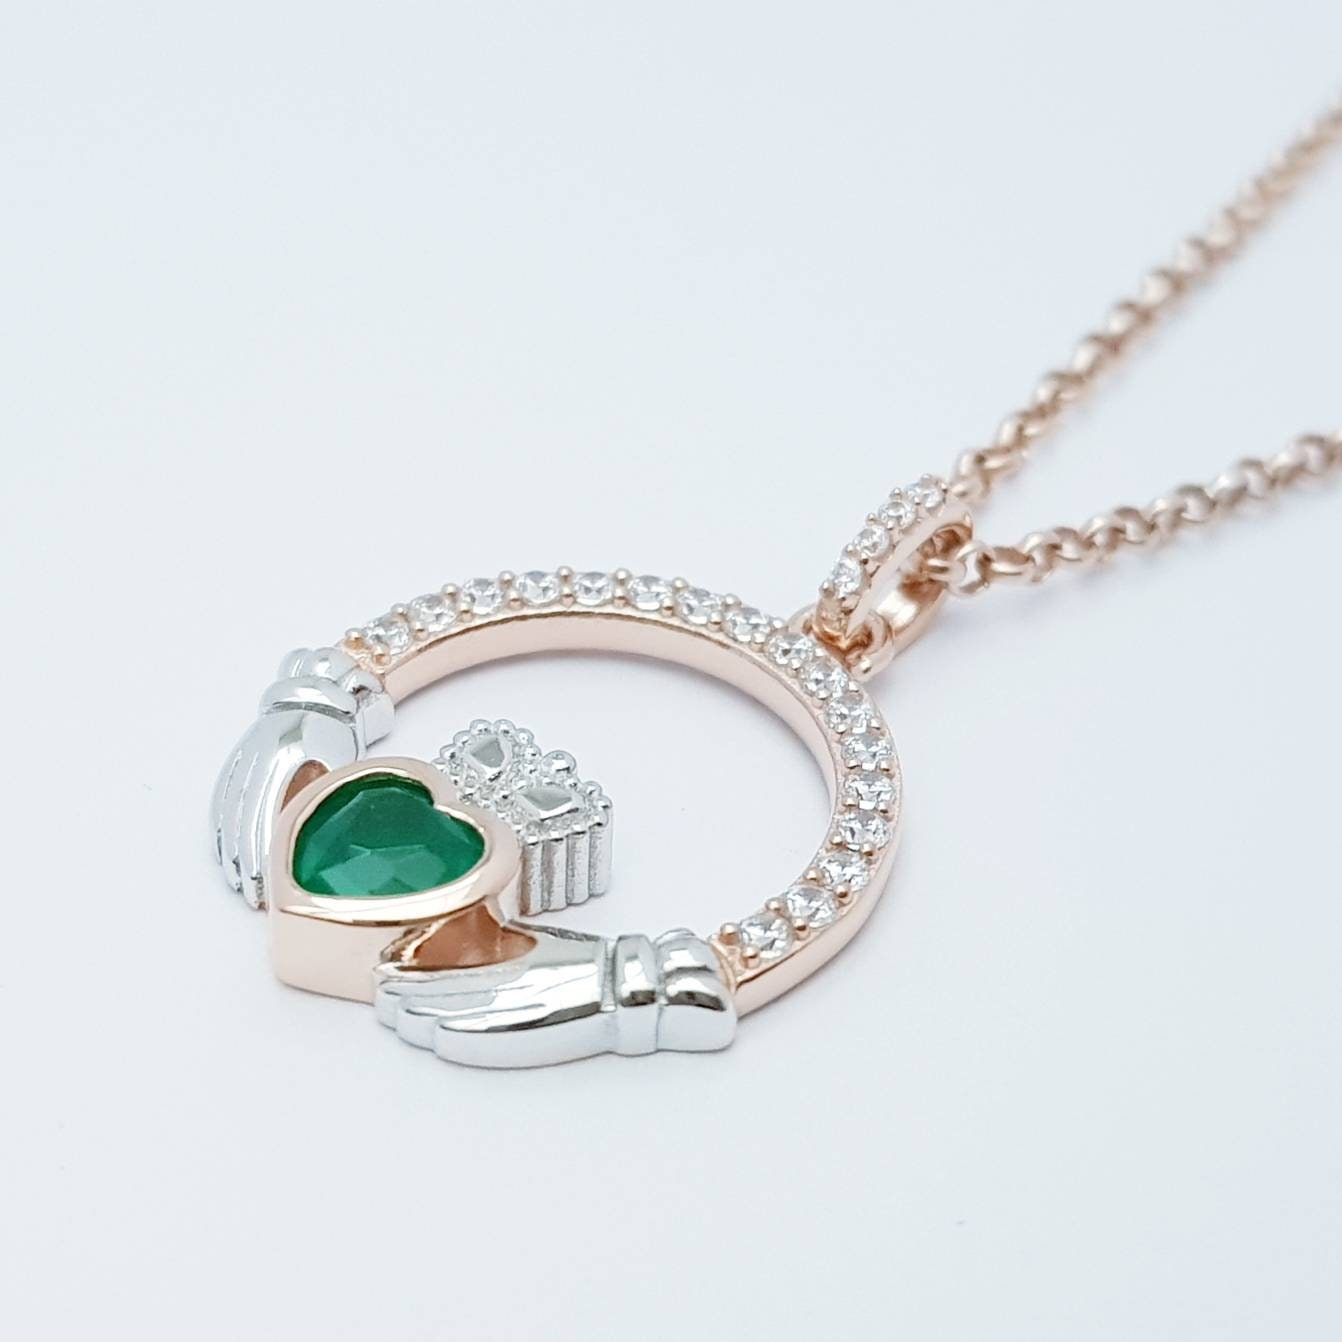 Green Claddagh pendant, two tone claddagh necklace from Galway, Ireland, silver and rose gold claddagh pendant